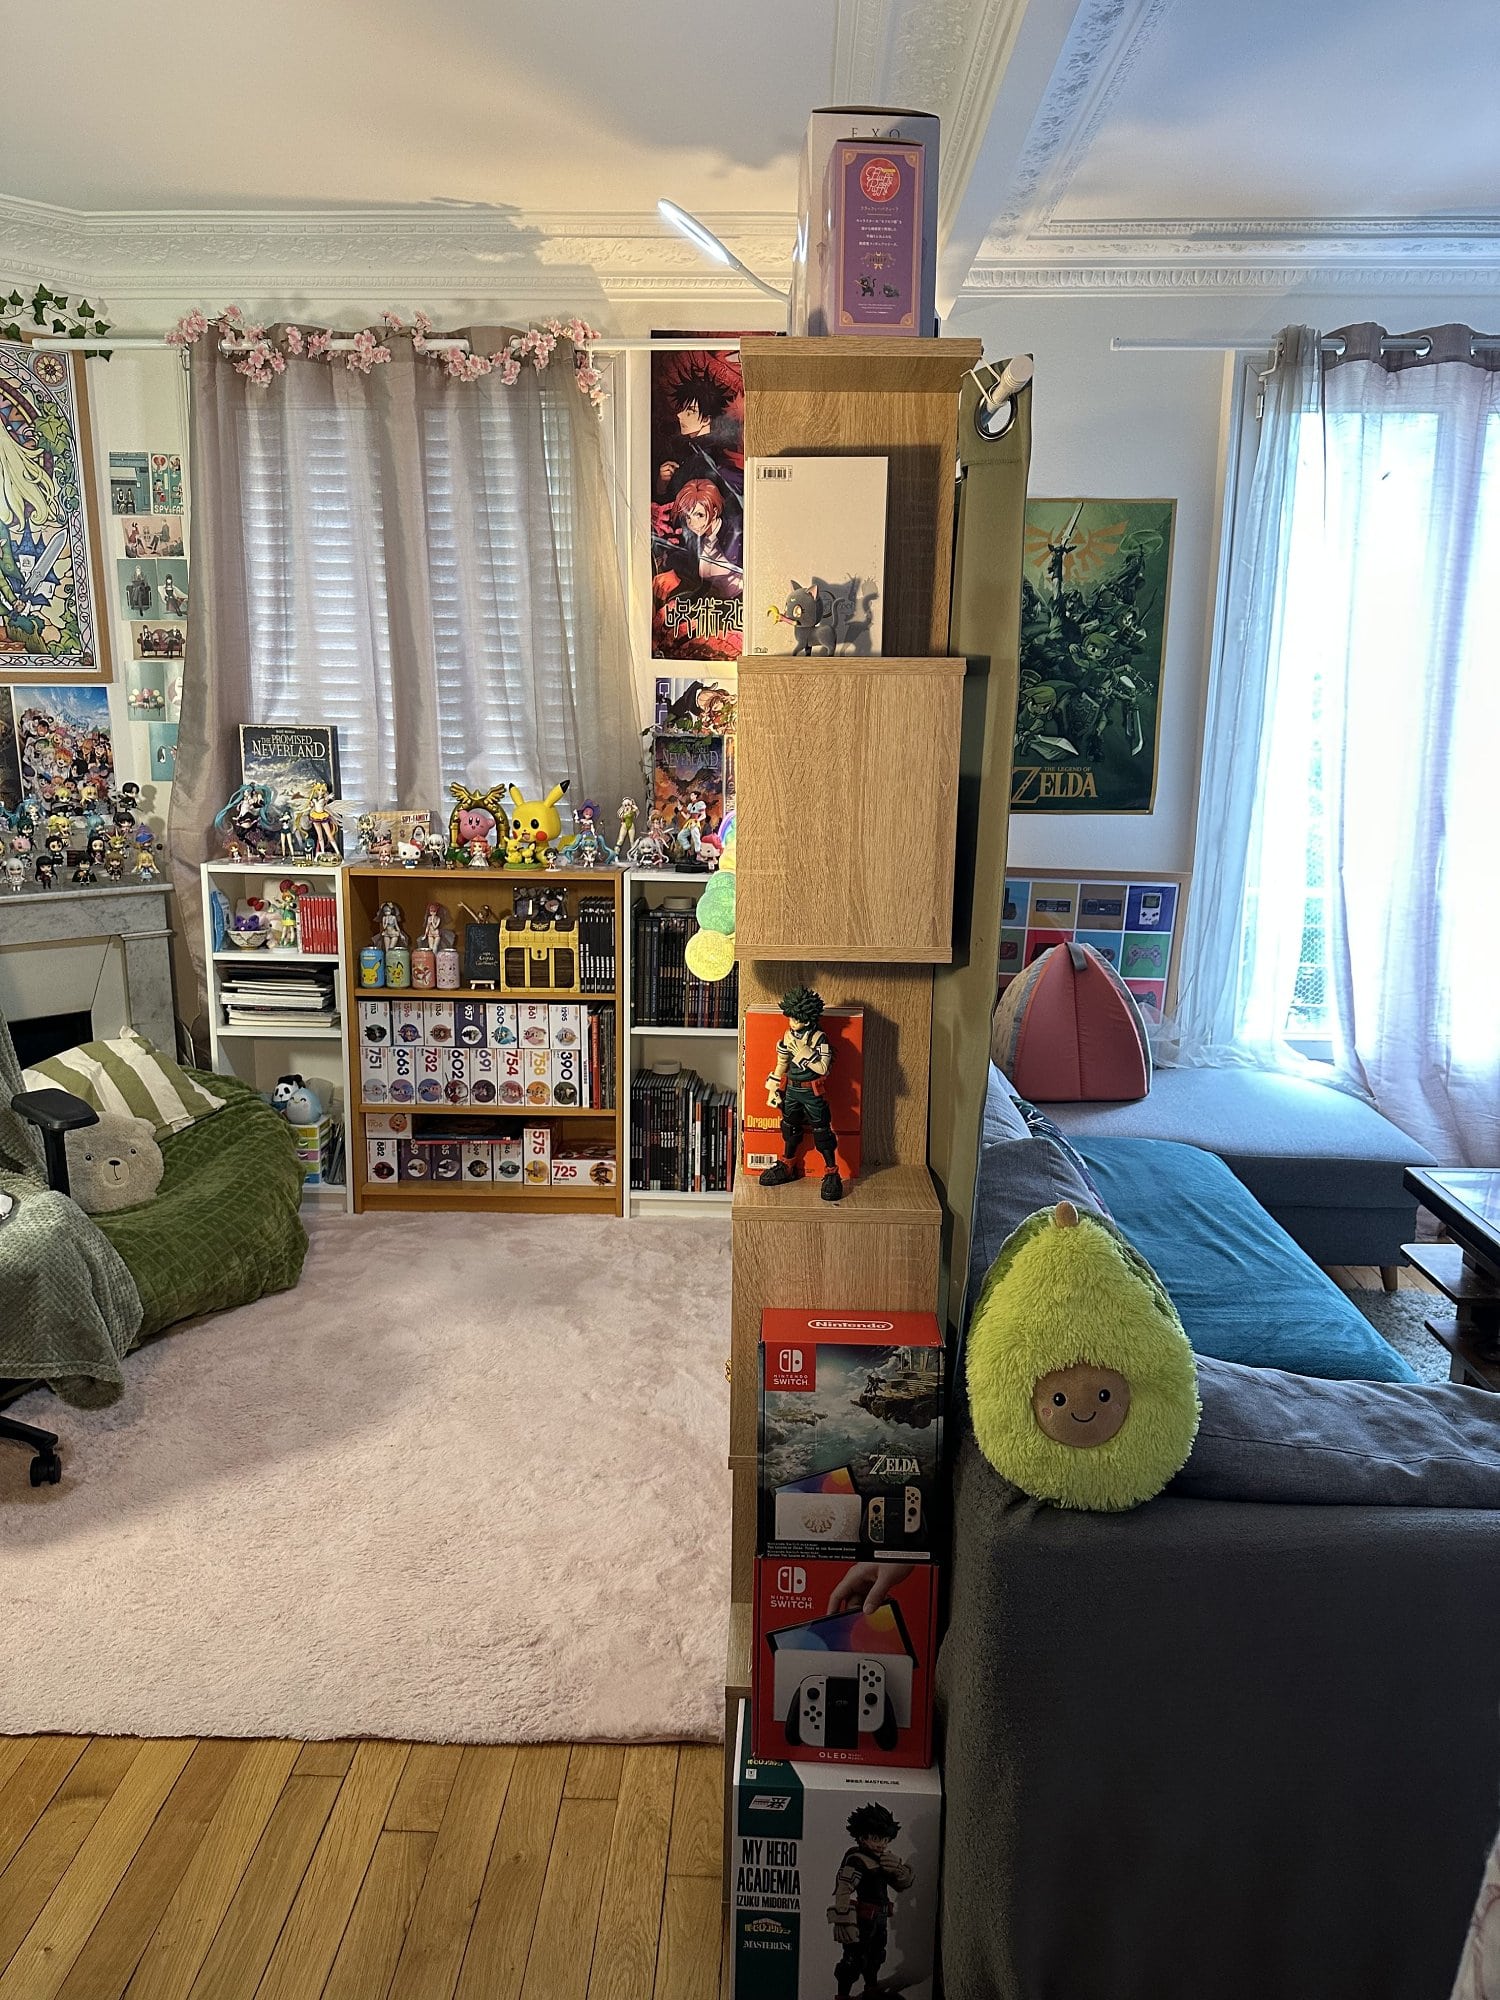 A living room featuring Japanese soft toys, video game wall art, and manga & anime figurines is divided into two sections by bookcases